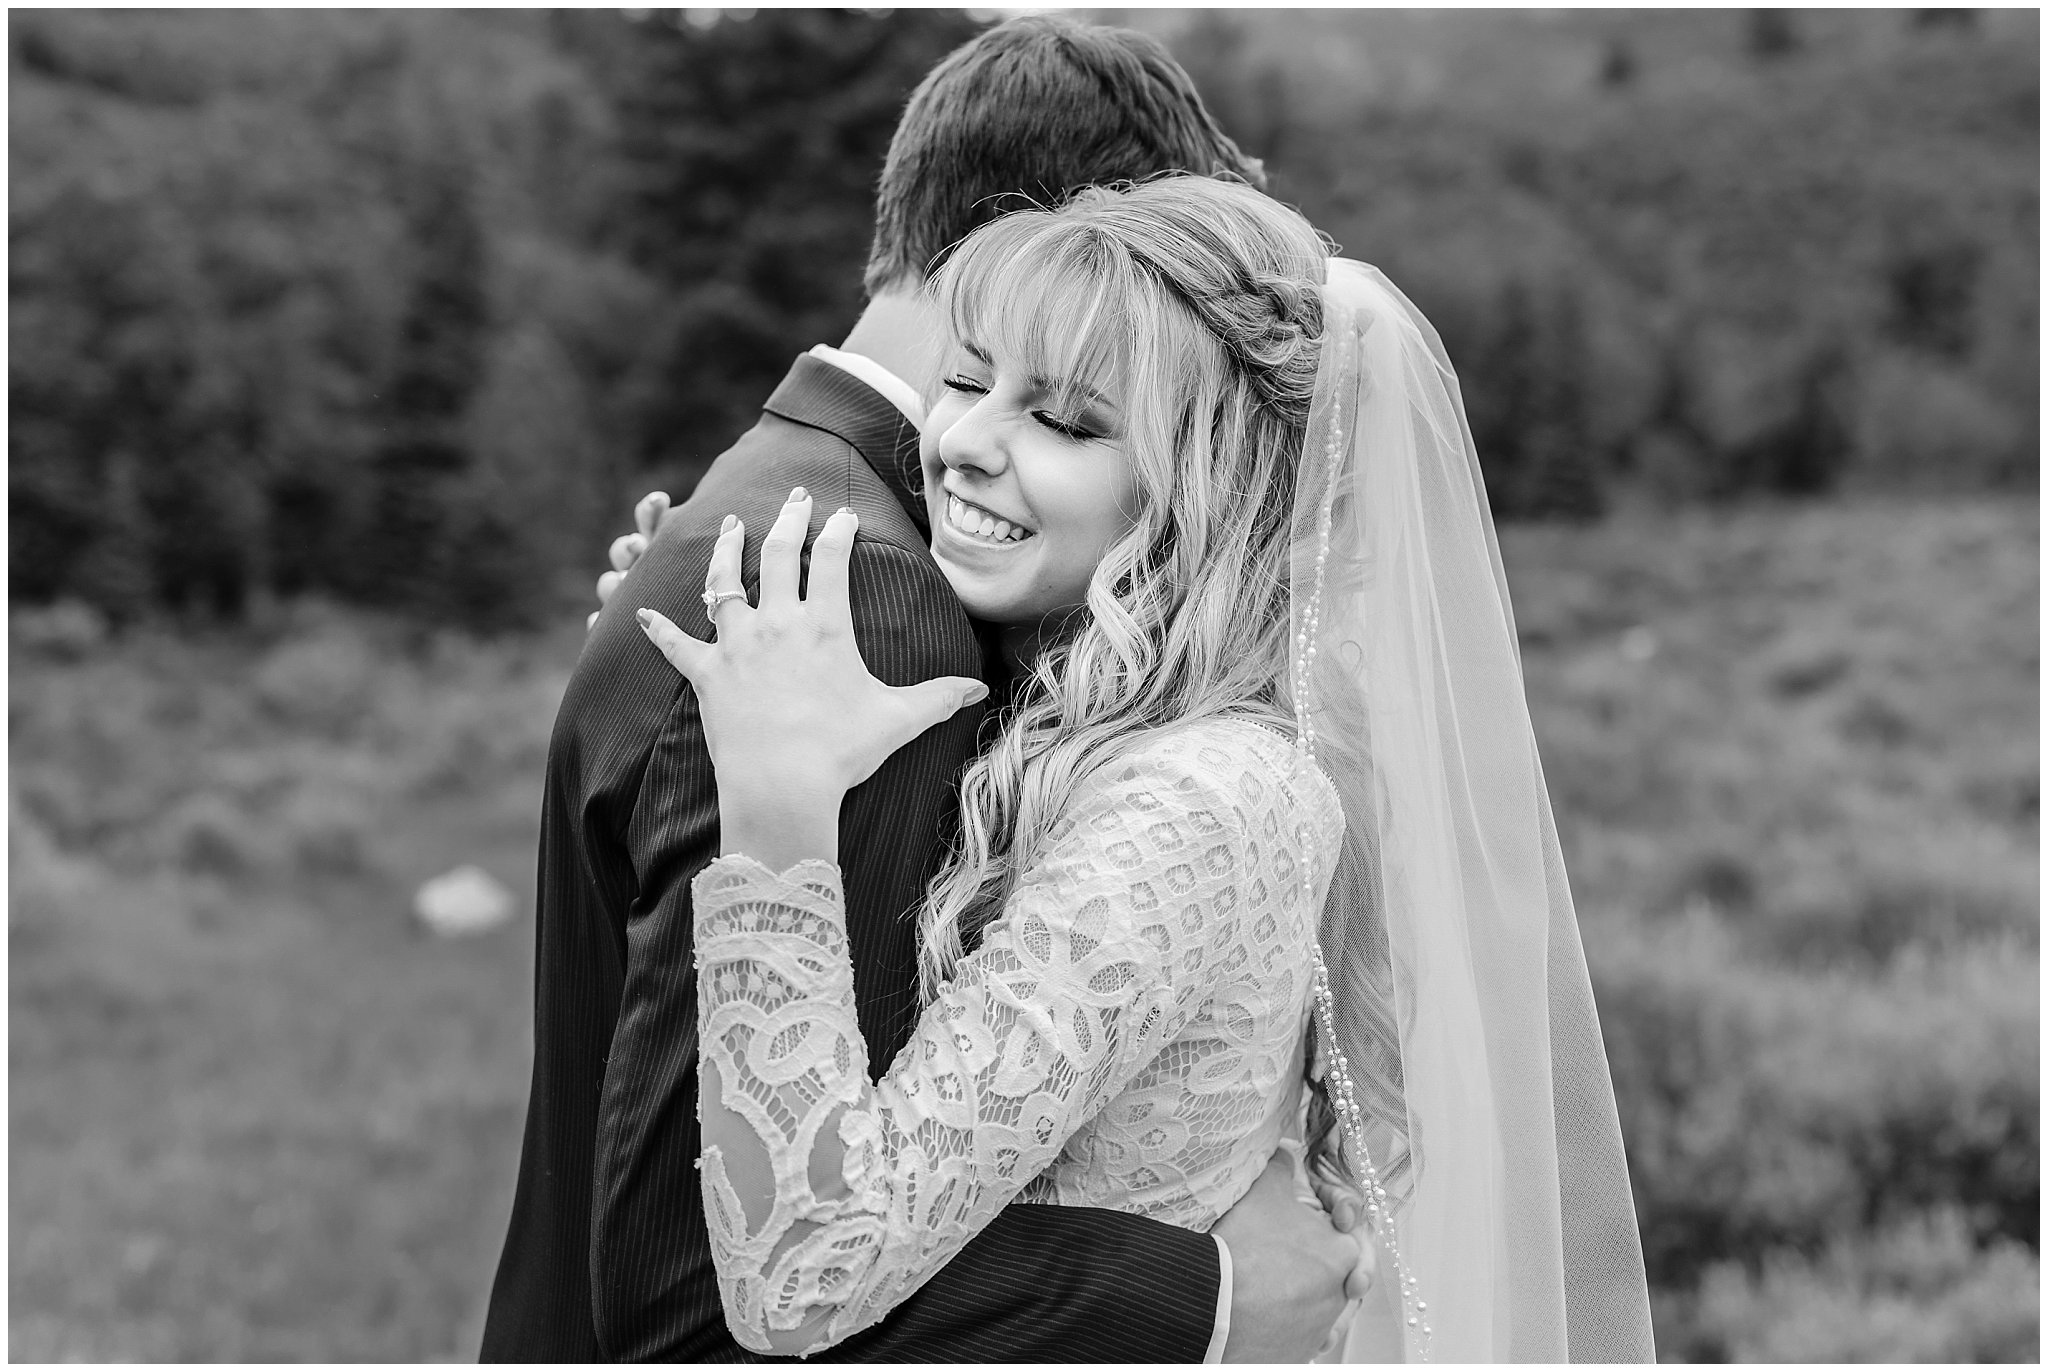 Bride and groom reactions during first look | Utah Mountain Wedding Formal Session | Tibble Fork Summer Formal Session | Jessie and Dallin Photography